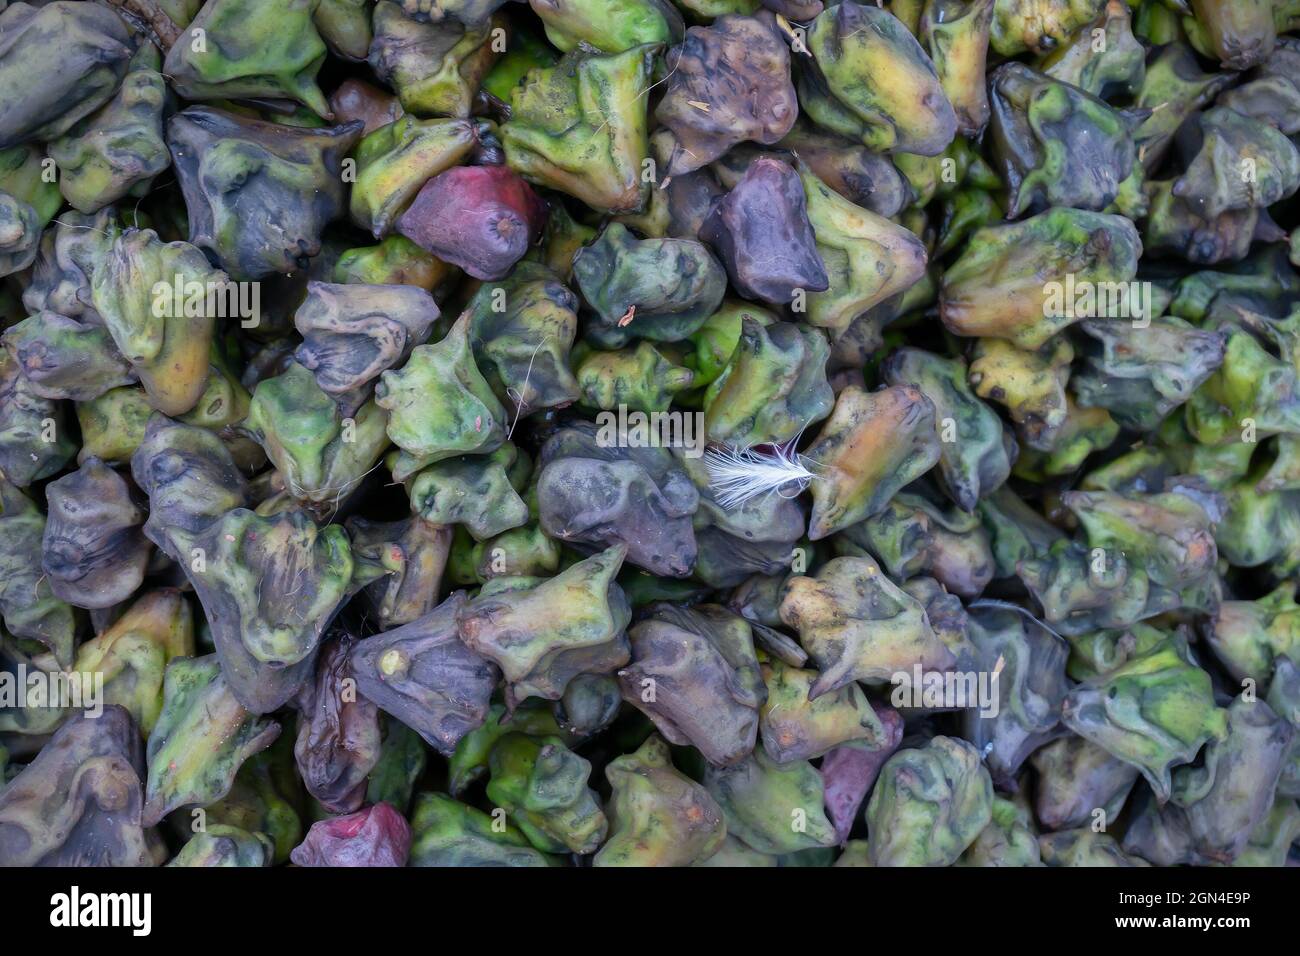 Water chestnut or water caltrop, Trapa bispinosa, is an aquatic plant. Called Singhara or Paniphal , in Bengali. Vegetables for sale in a market in Te Stock Photo